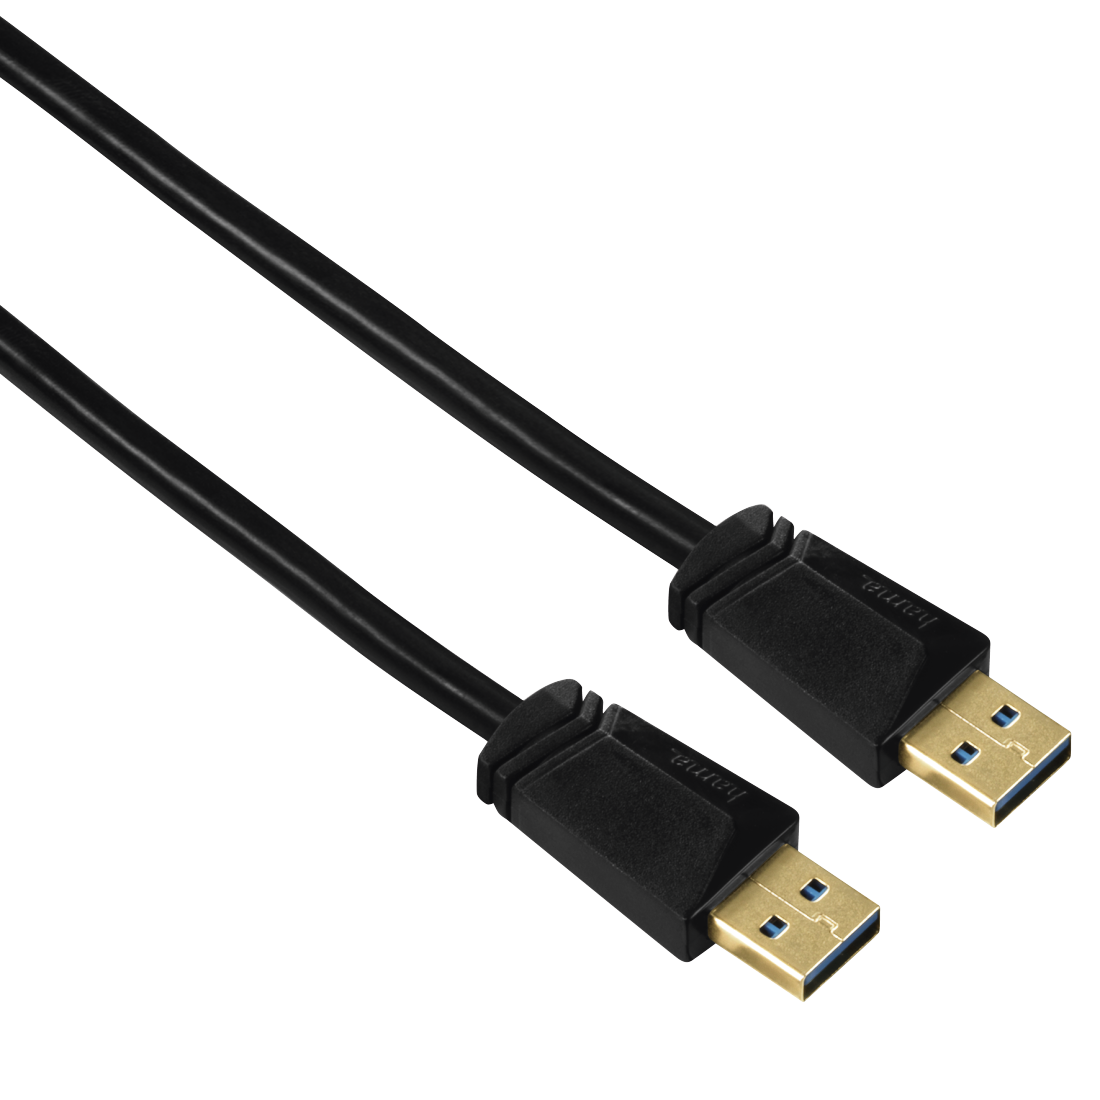 Hama USB 3.0 Cable A-A, gold-plated, double shielded, black, 1.80 m